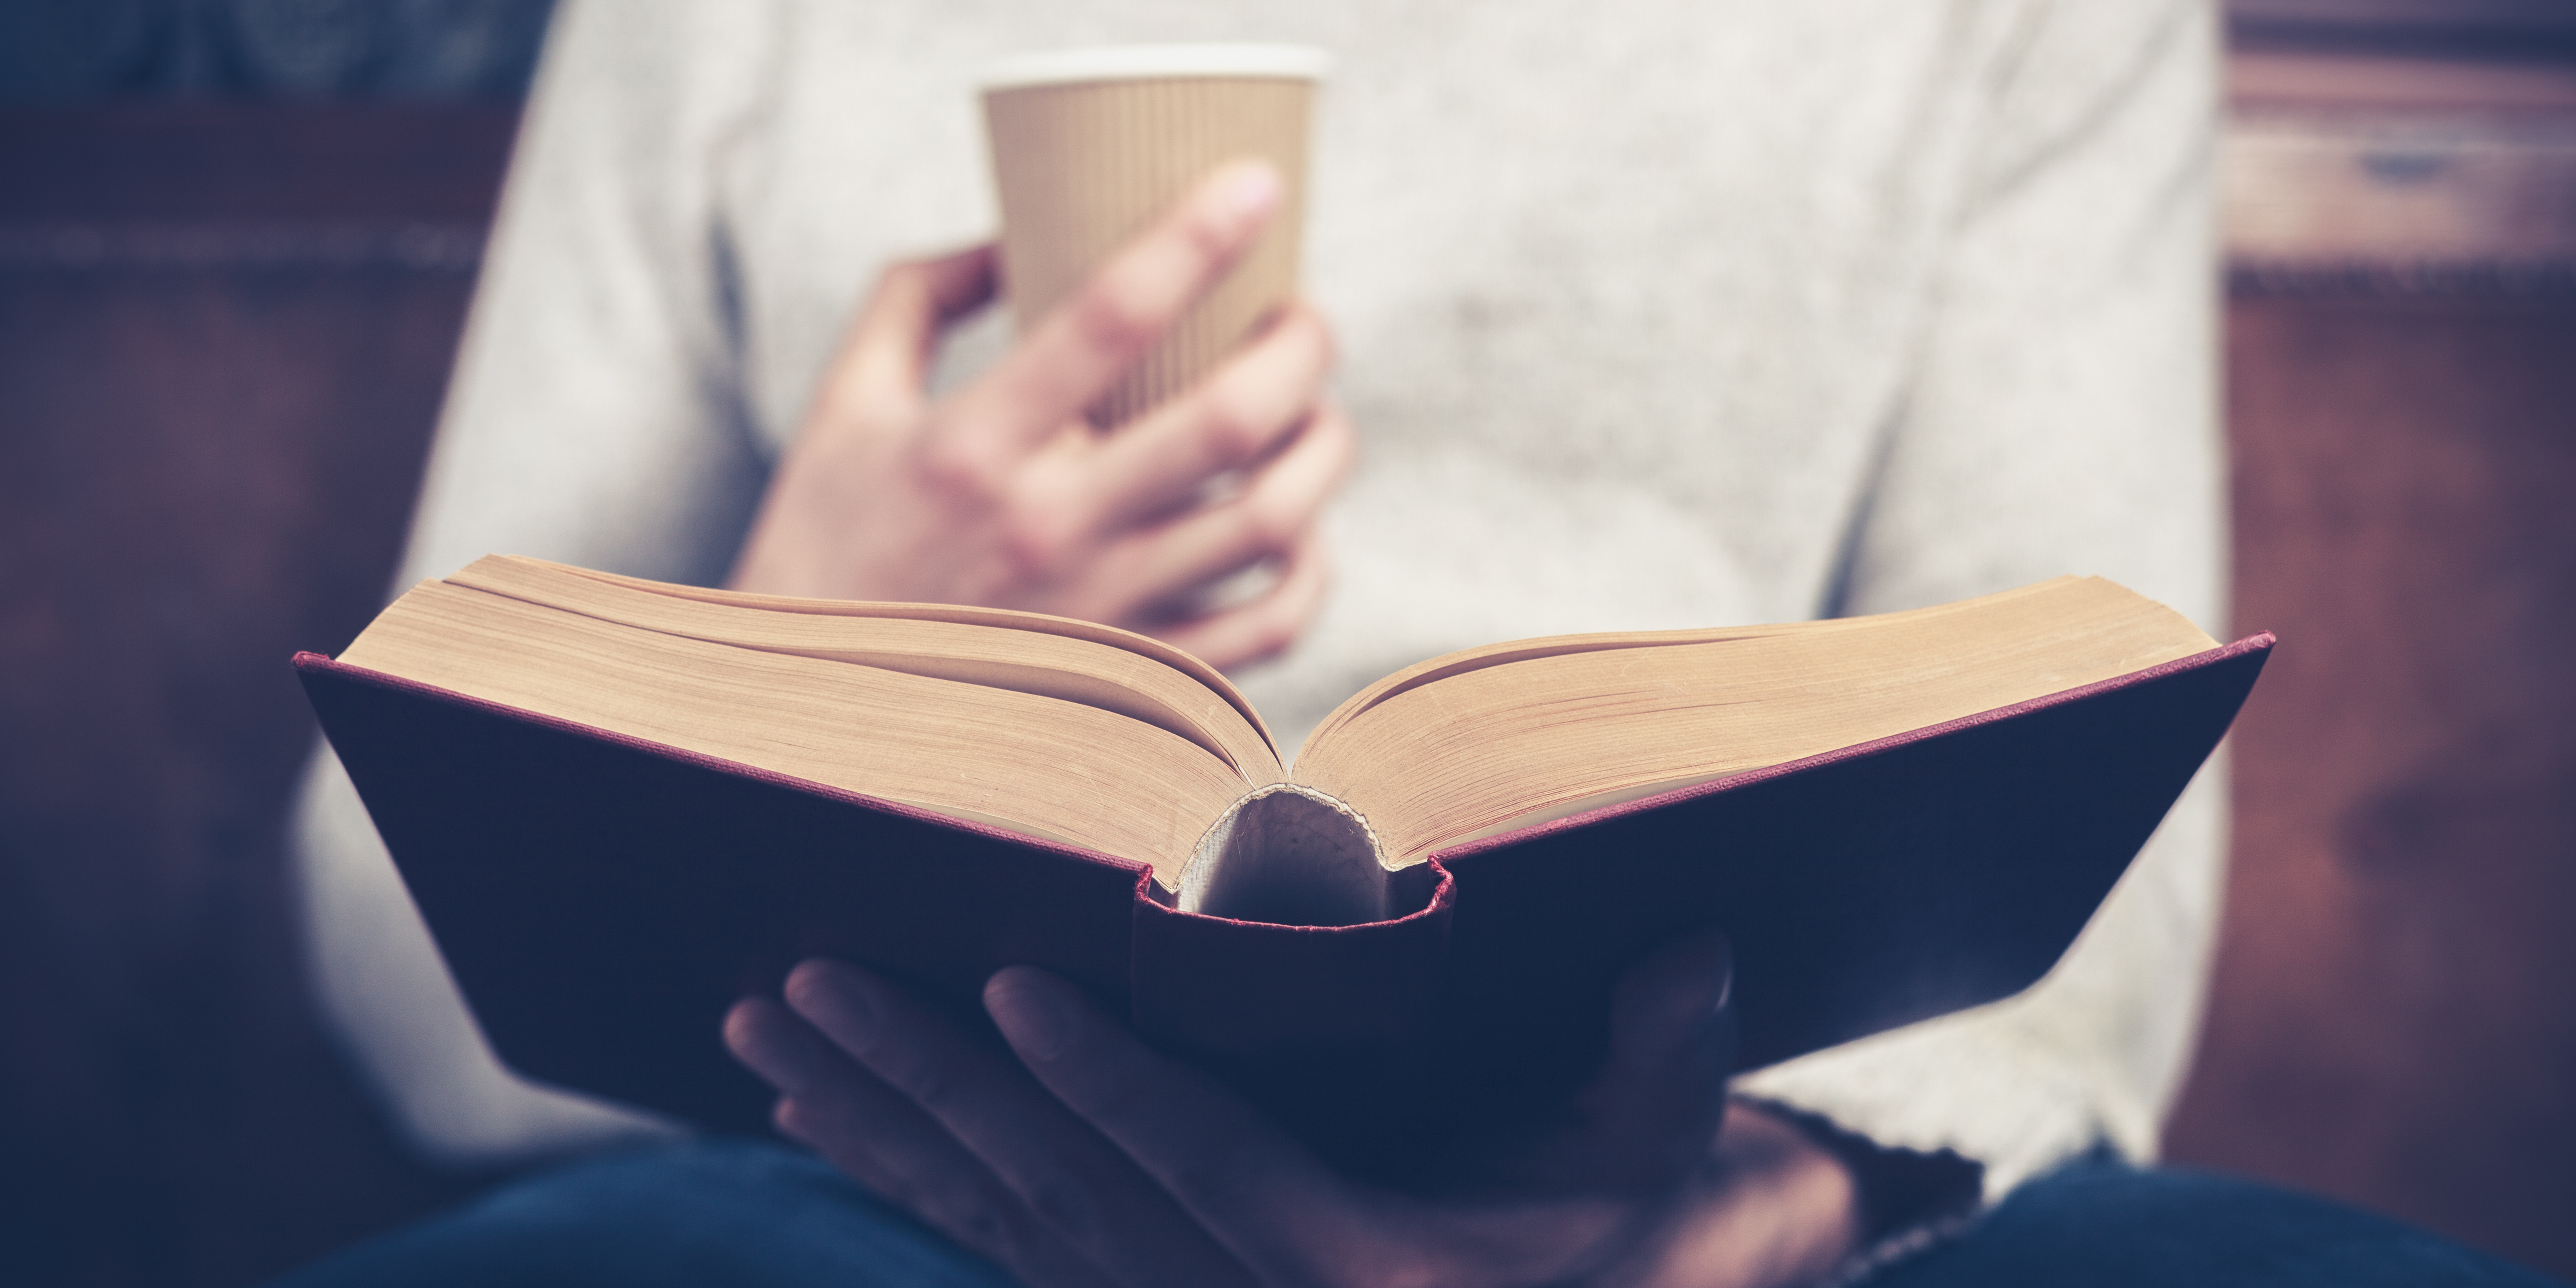 13 Professional Development Books to Help Build Your Business Library